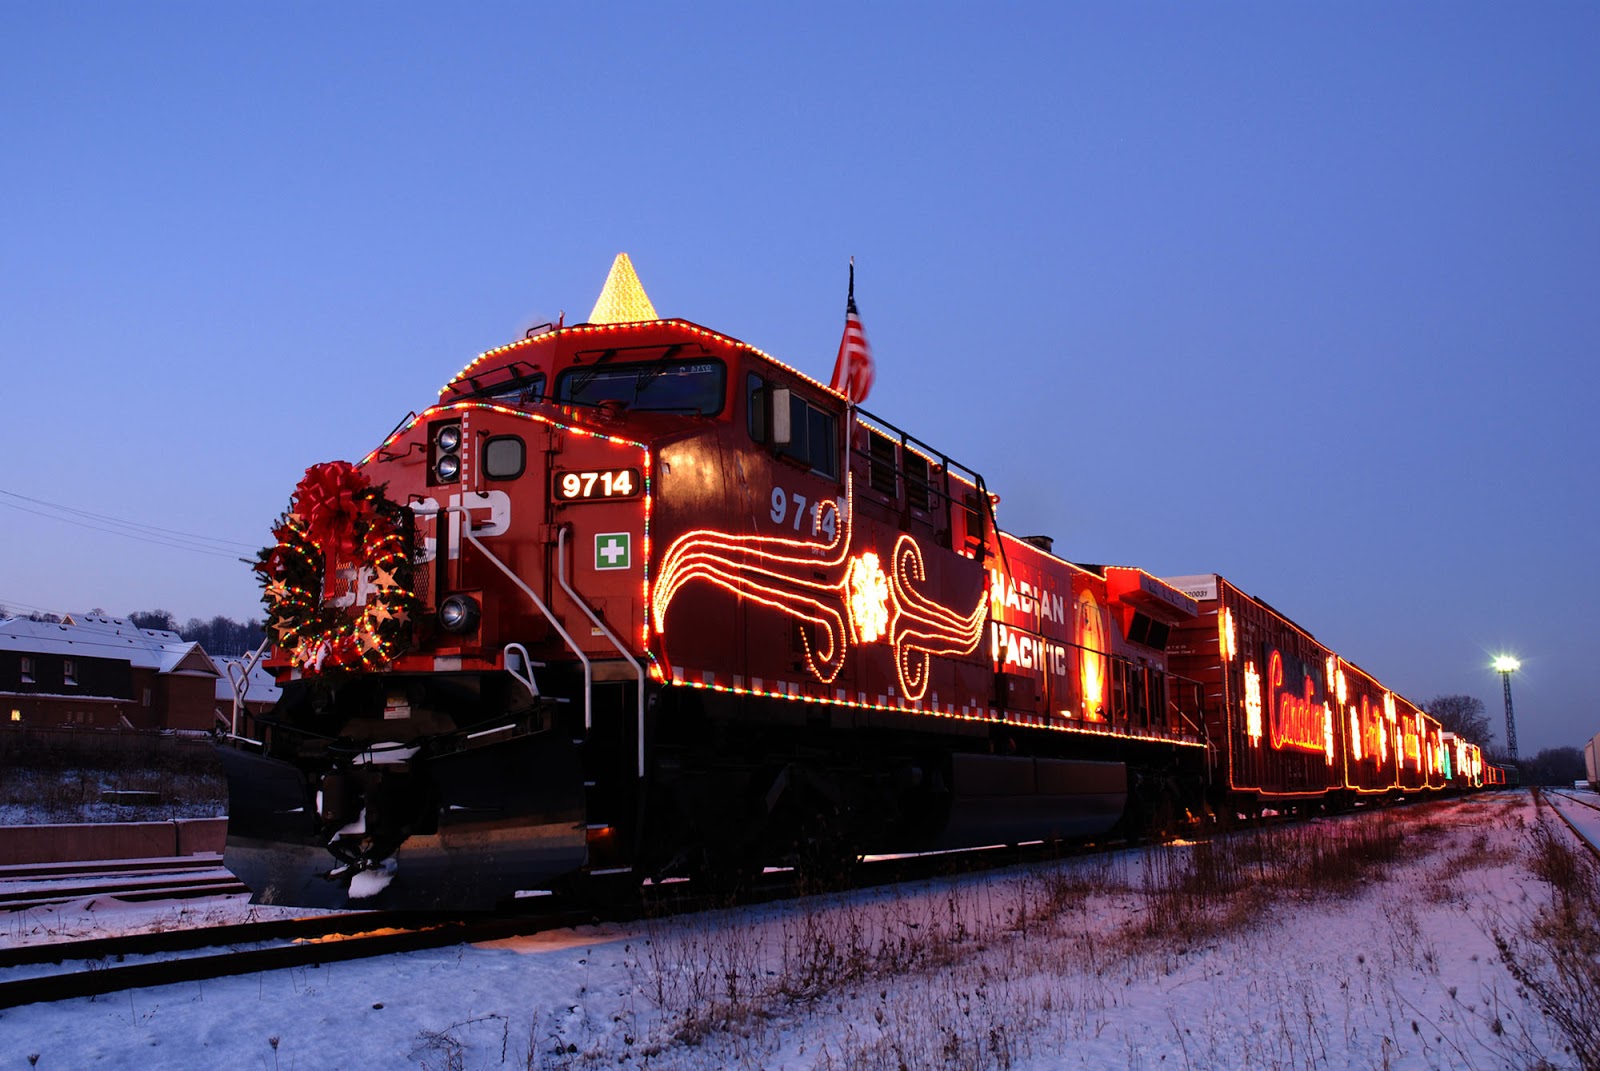 Winnipeg Model Railroad Club: The CP holiday train is coming to town!